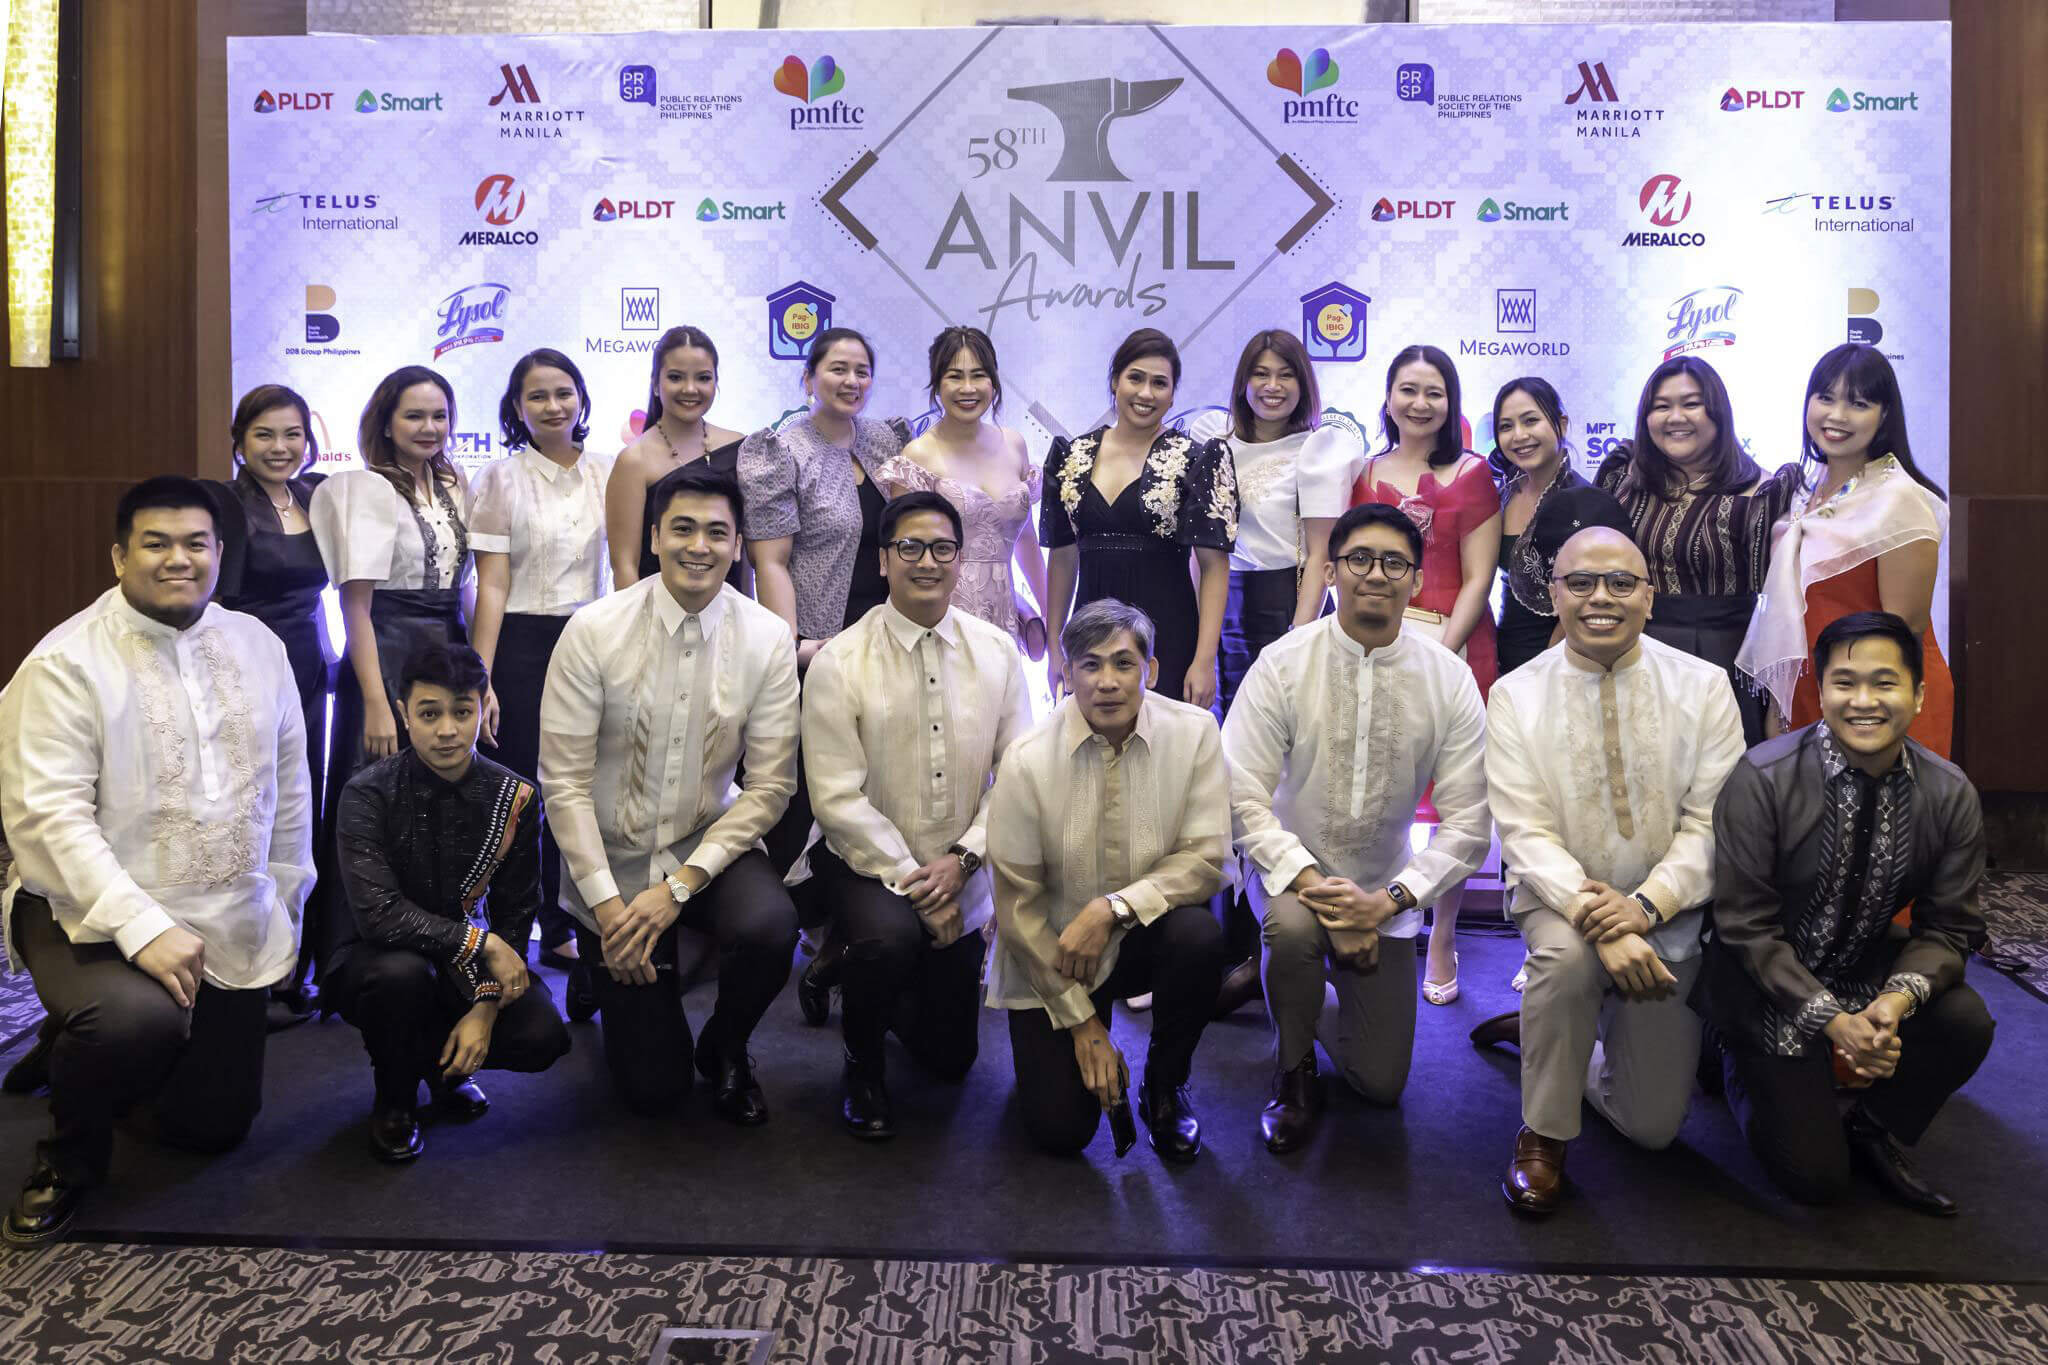 PLDT Home bagged a total of 8 awards at the 58th Anvil Awards held at Marriott Grand Ballroom. In this photo are the PLDT Home Marketing Team together with AVP and Head of Public Relations and Influencer Management Cheryl Maxine Loyola, VP and Head of Digital Services Evert Chris Miranda, and AVP and Head of Digital Services Janice Lagaso, AVP and Home Biz Product Head Venancio Felix Valencia.